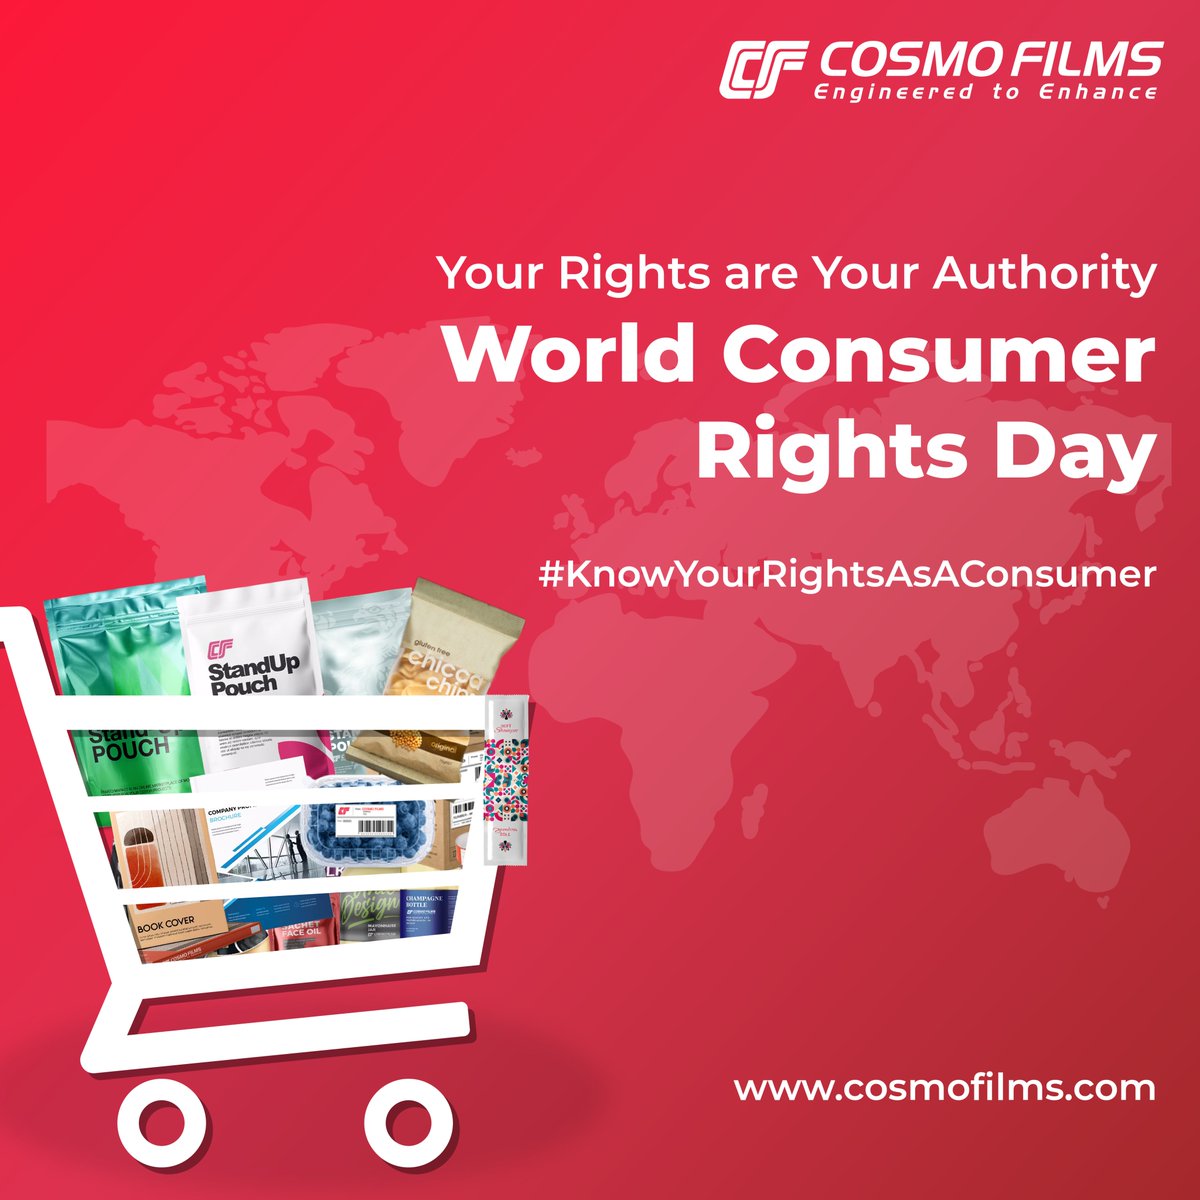 Cosmo Films believes in - empowering individuals and demanding fairness. Here's to a world where informed choices shape industries and consumer rights are honored and protected.  
World Consumer Rights Day!   

#consumerrightsday #packaging #packagingsolutions #bopp #cosmofilms